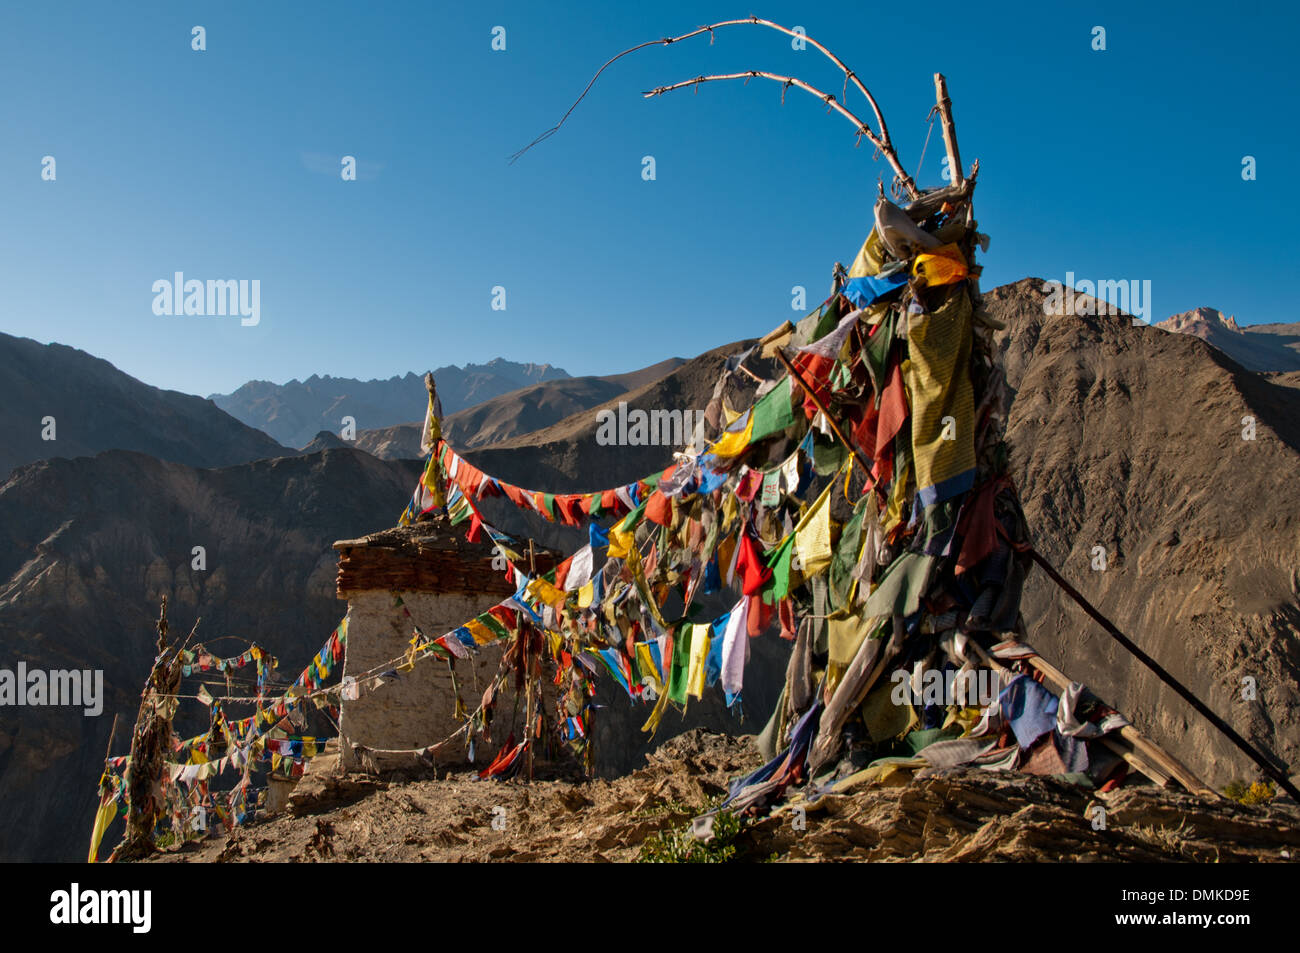 The beautiful valley of Leh in Ladakh, India. Stock Photo